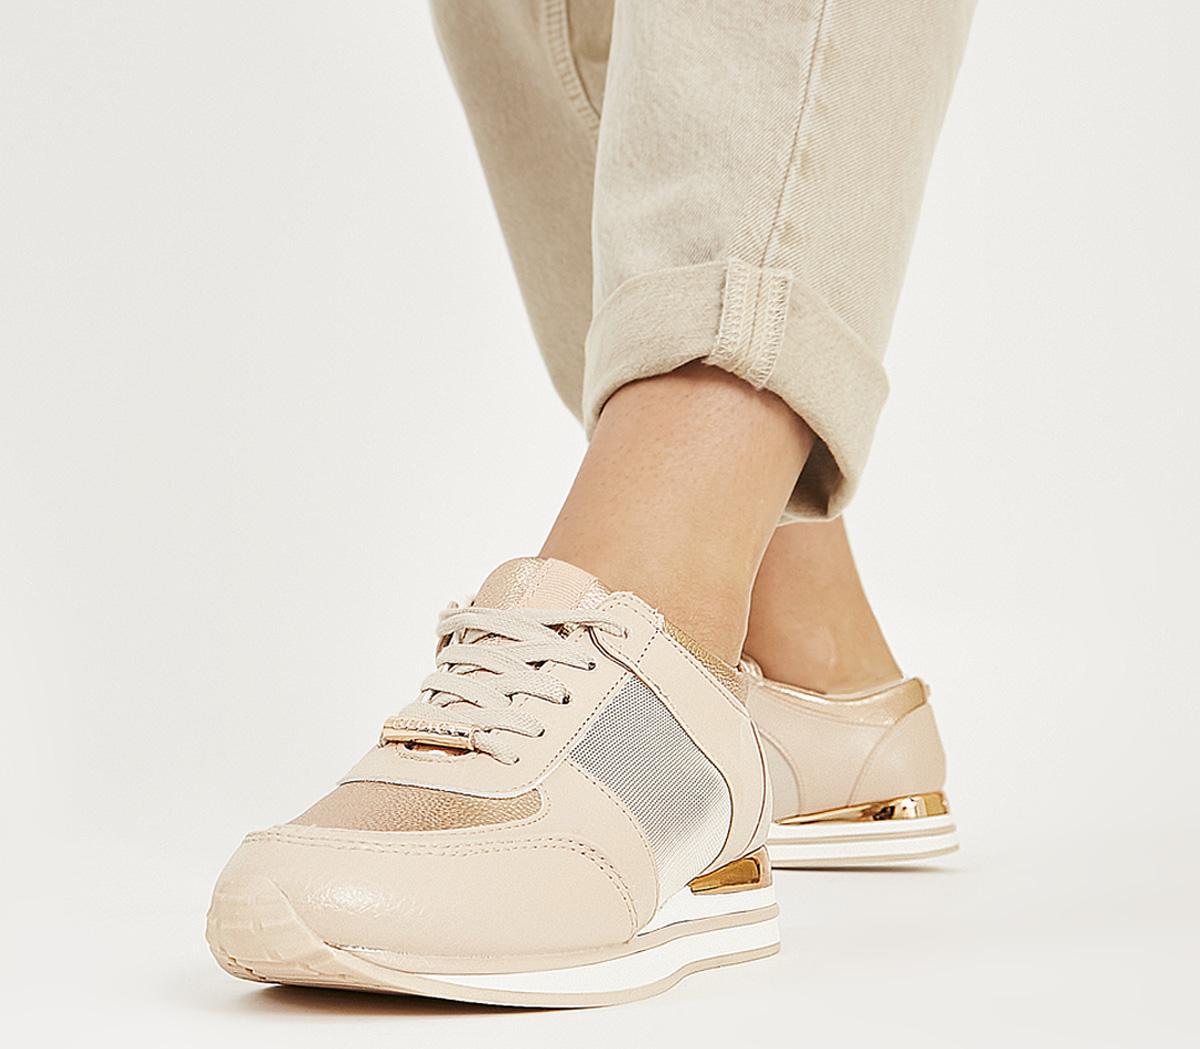 OFFICEFollow Lace Up RunnersWhite Beige Mix